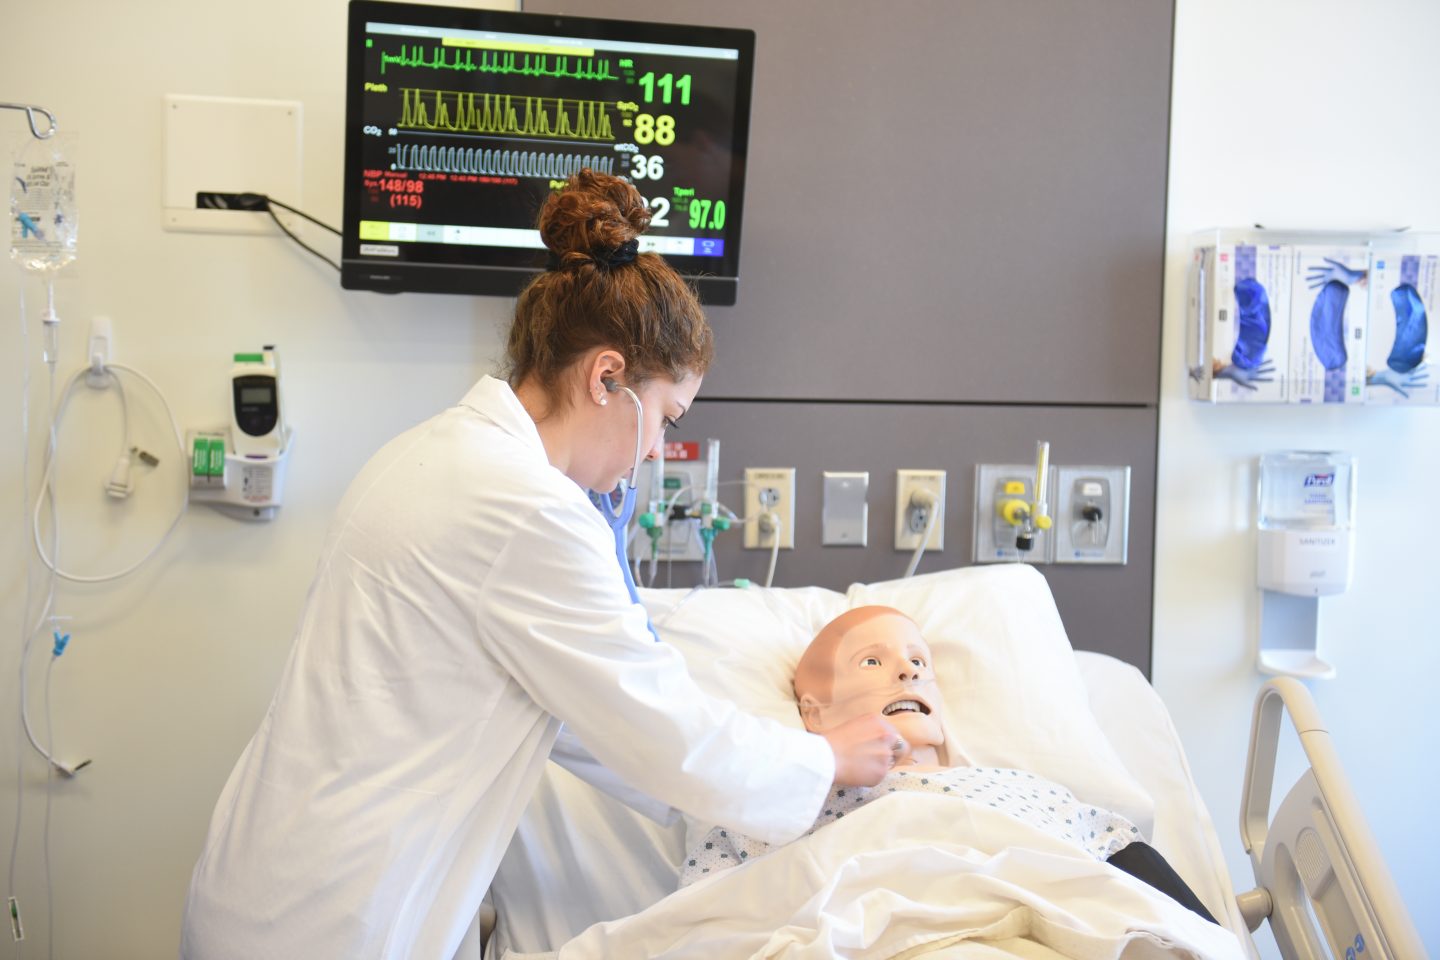 For CNPH nursing students, learning in the various CESiL simulated settings and situations is like training in a real hospital. That experience was especially invaluable in the midst of the pandemic, nursing students said.